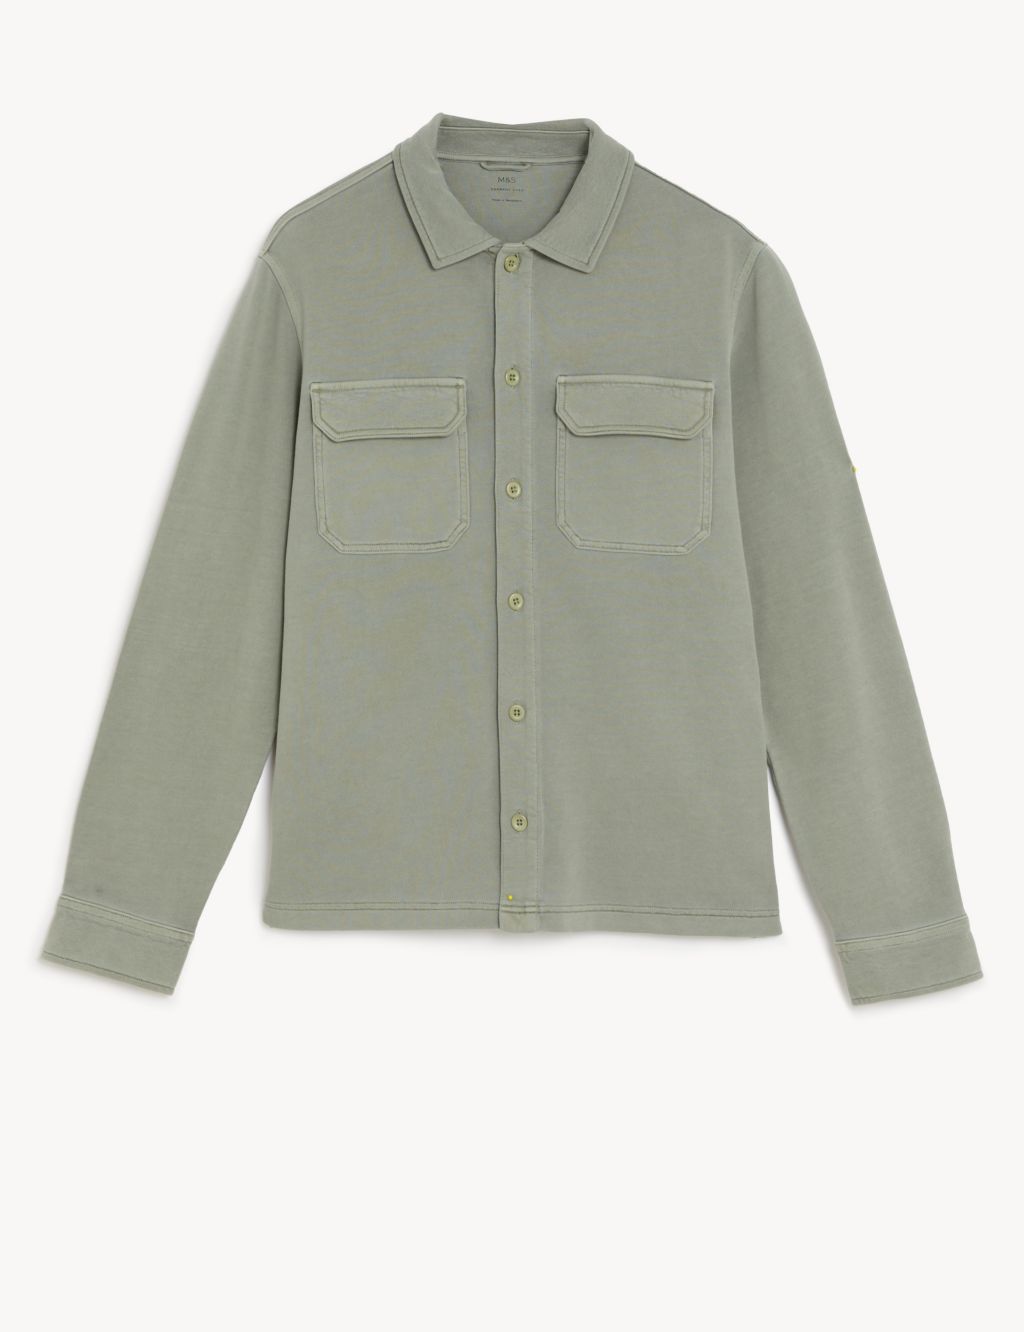 Page 2 - Men's Overshirts | Men's Shackets | M&S